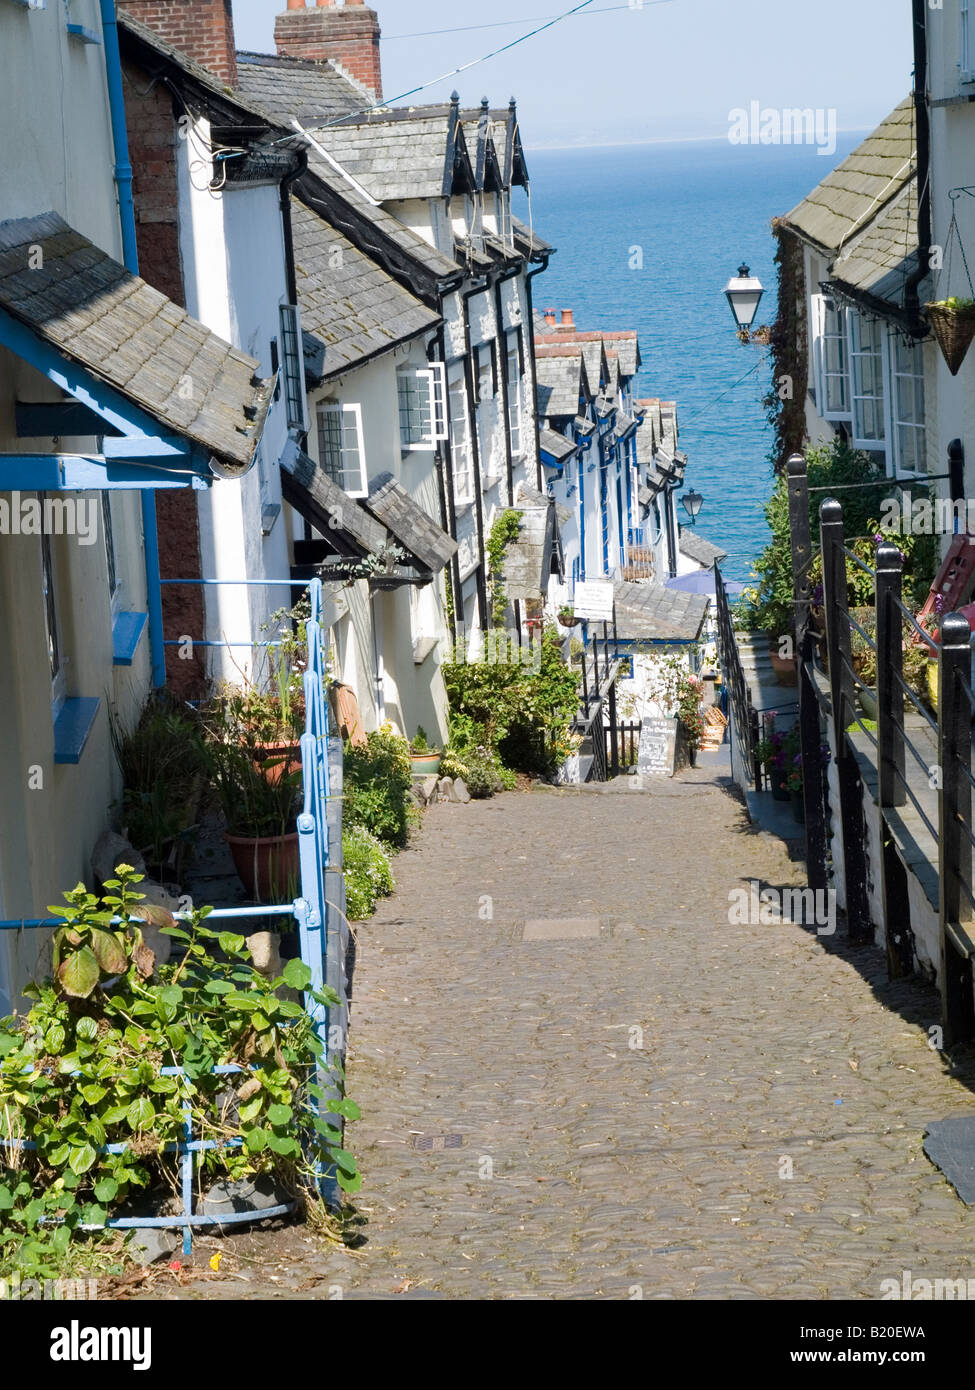 The steep cobbles street leading down to the harbour area in the historic fishing village of Clovelly, North Devon UK Stock Photo